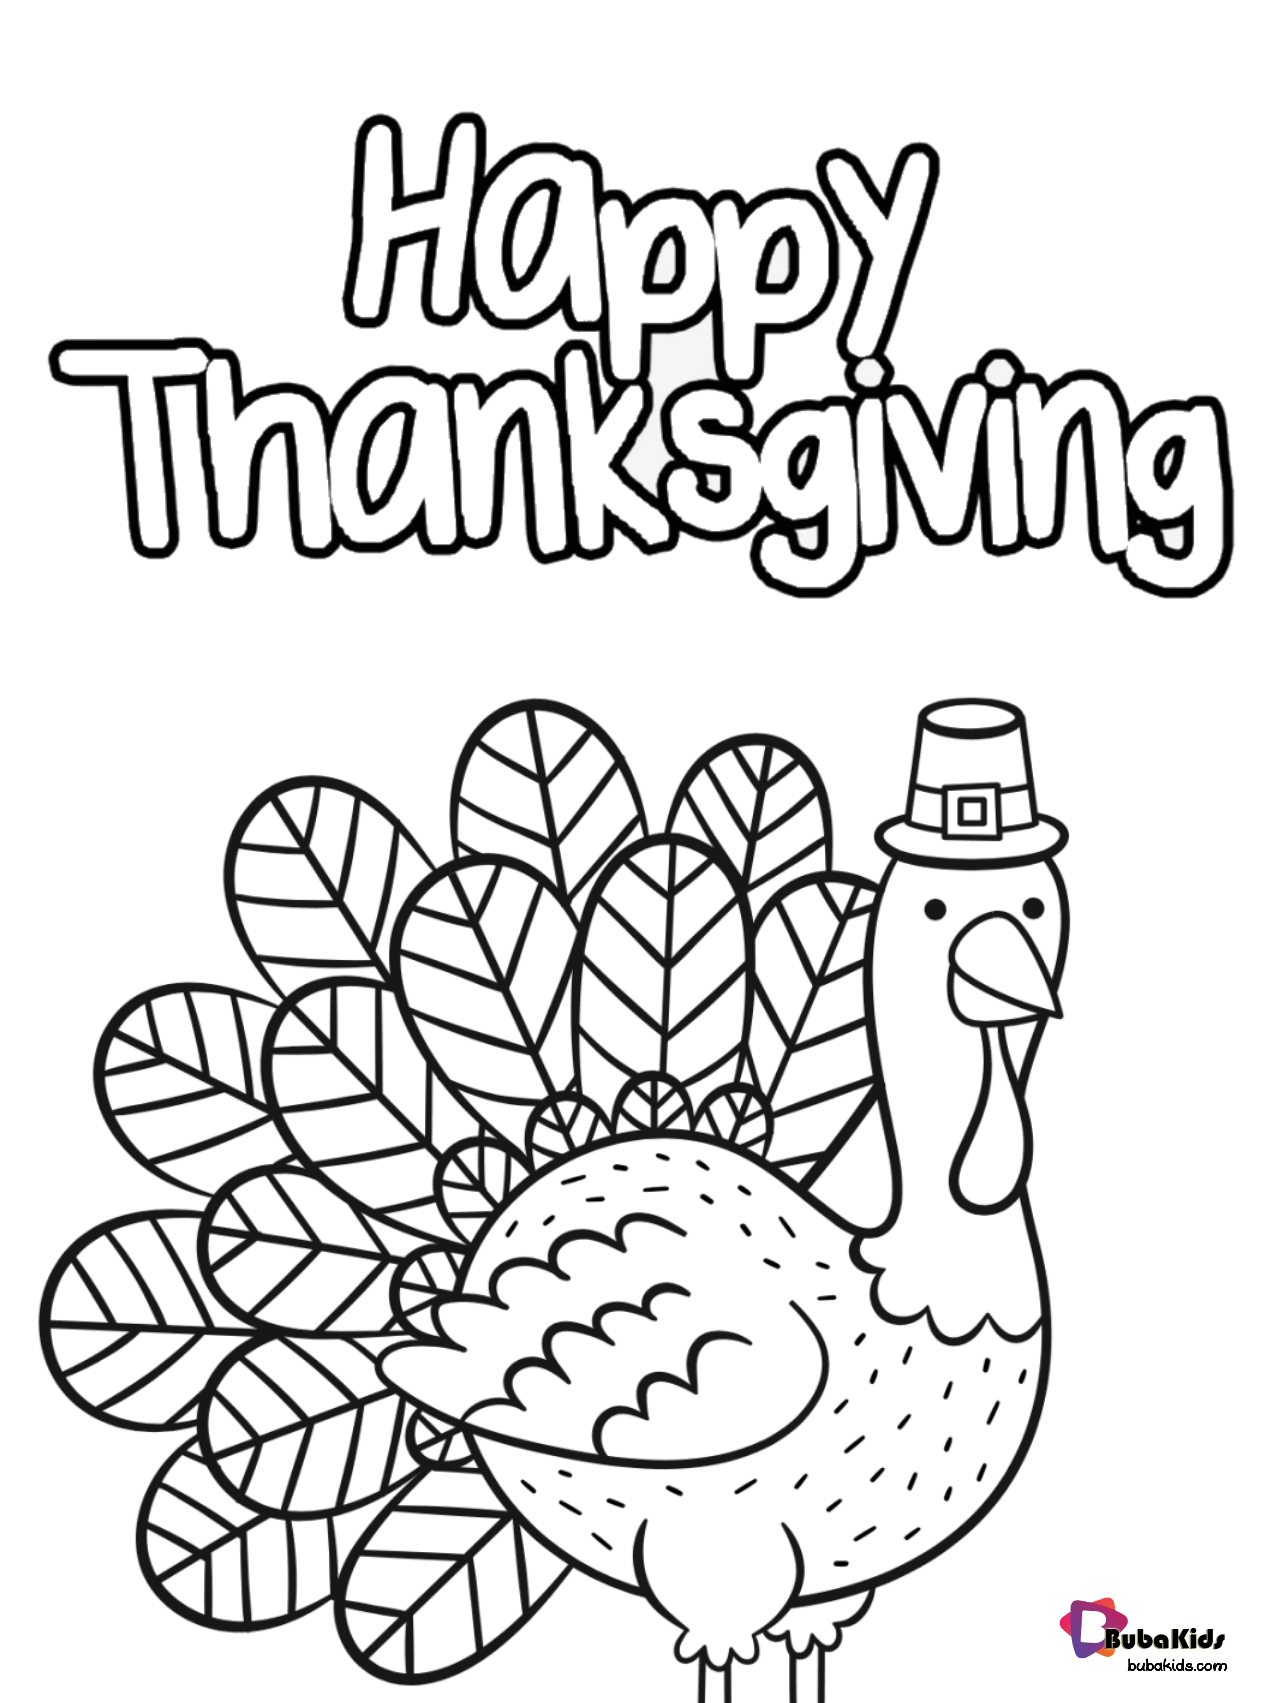 Free and printable Happy thanksgiving coloring page. Wallpaper